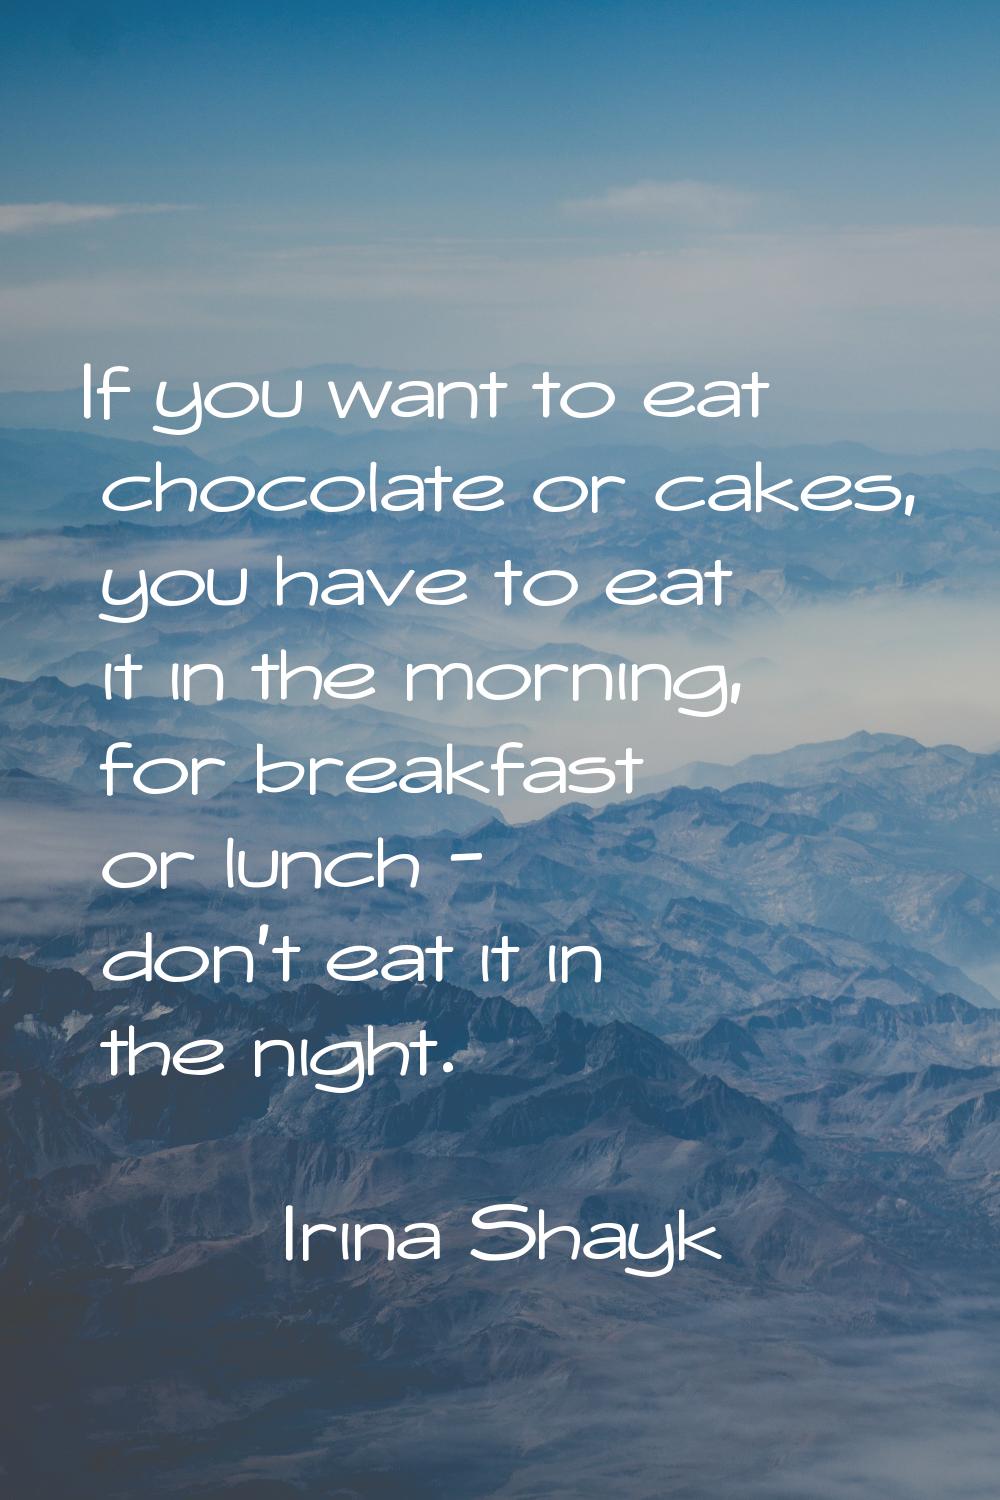 If you want to eat chocolate or cakes, you have to eat it in the morning, for breakfast or lunch - 